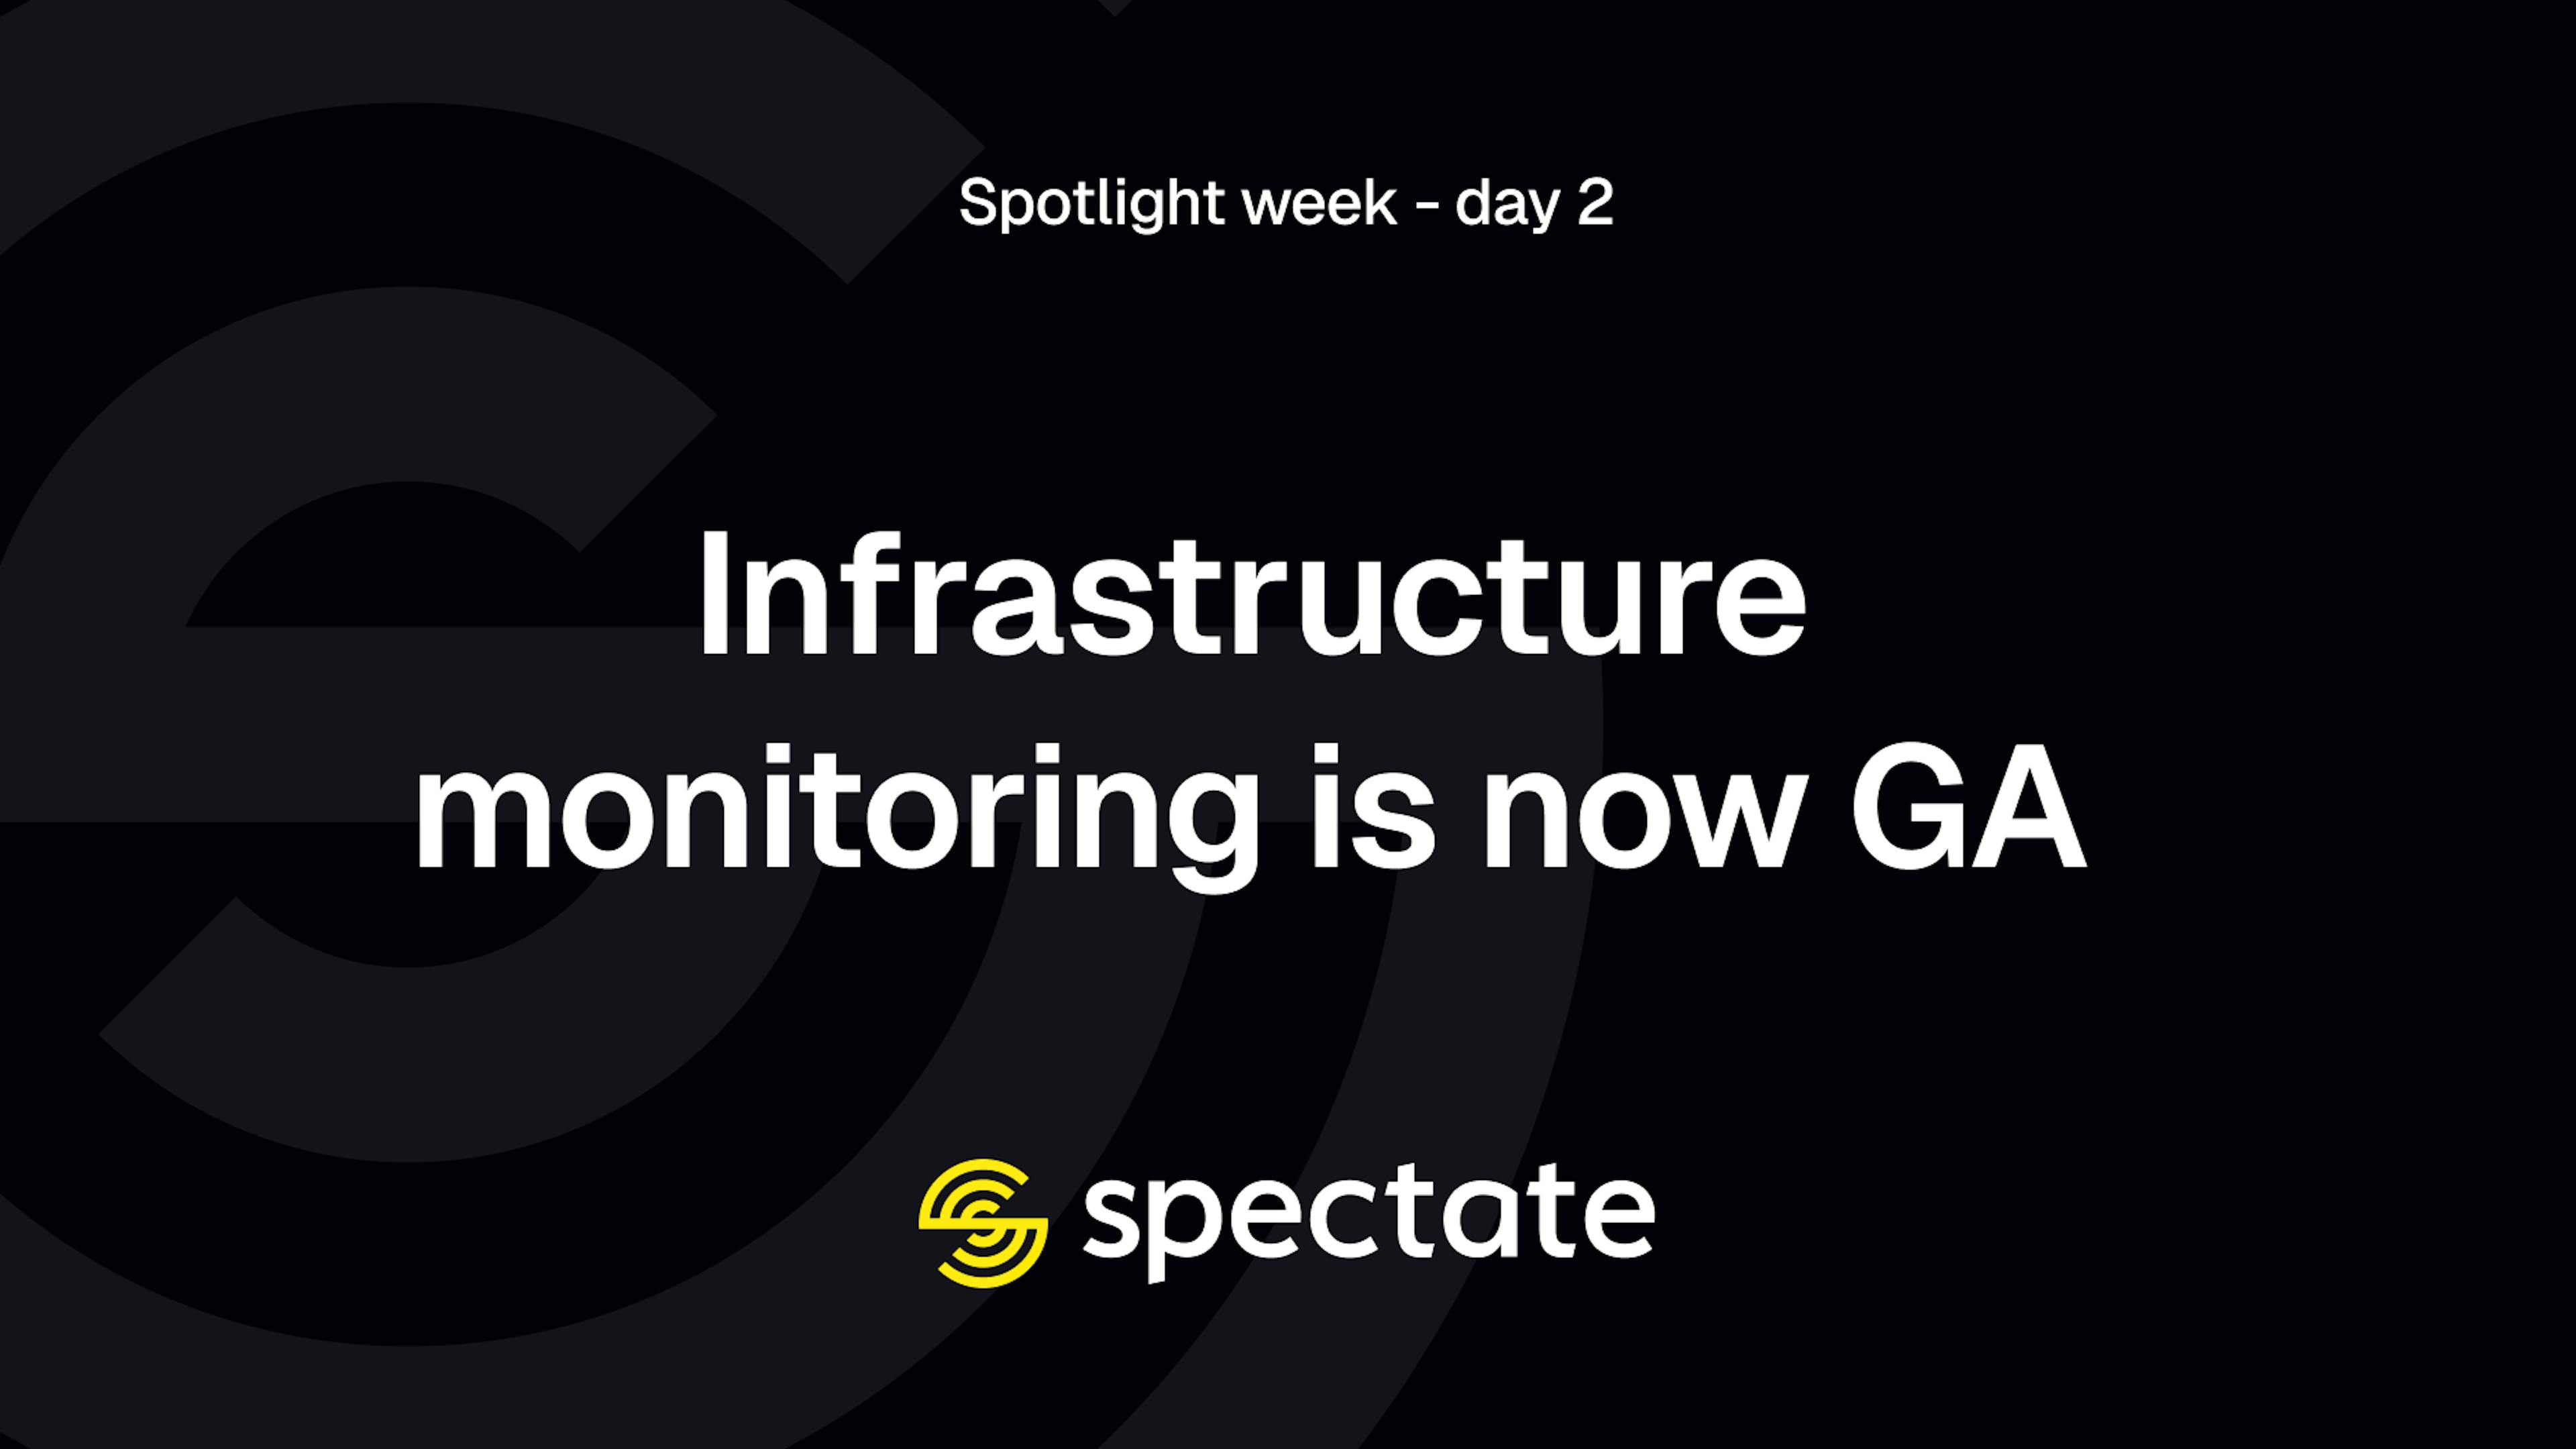 Spotlight week - day 2: Infrastructure monitoring is now in general availability